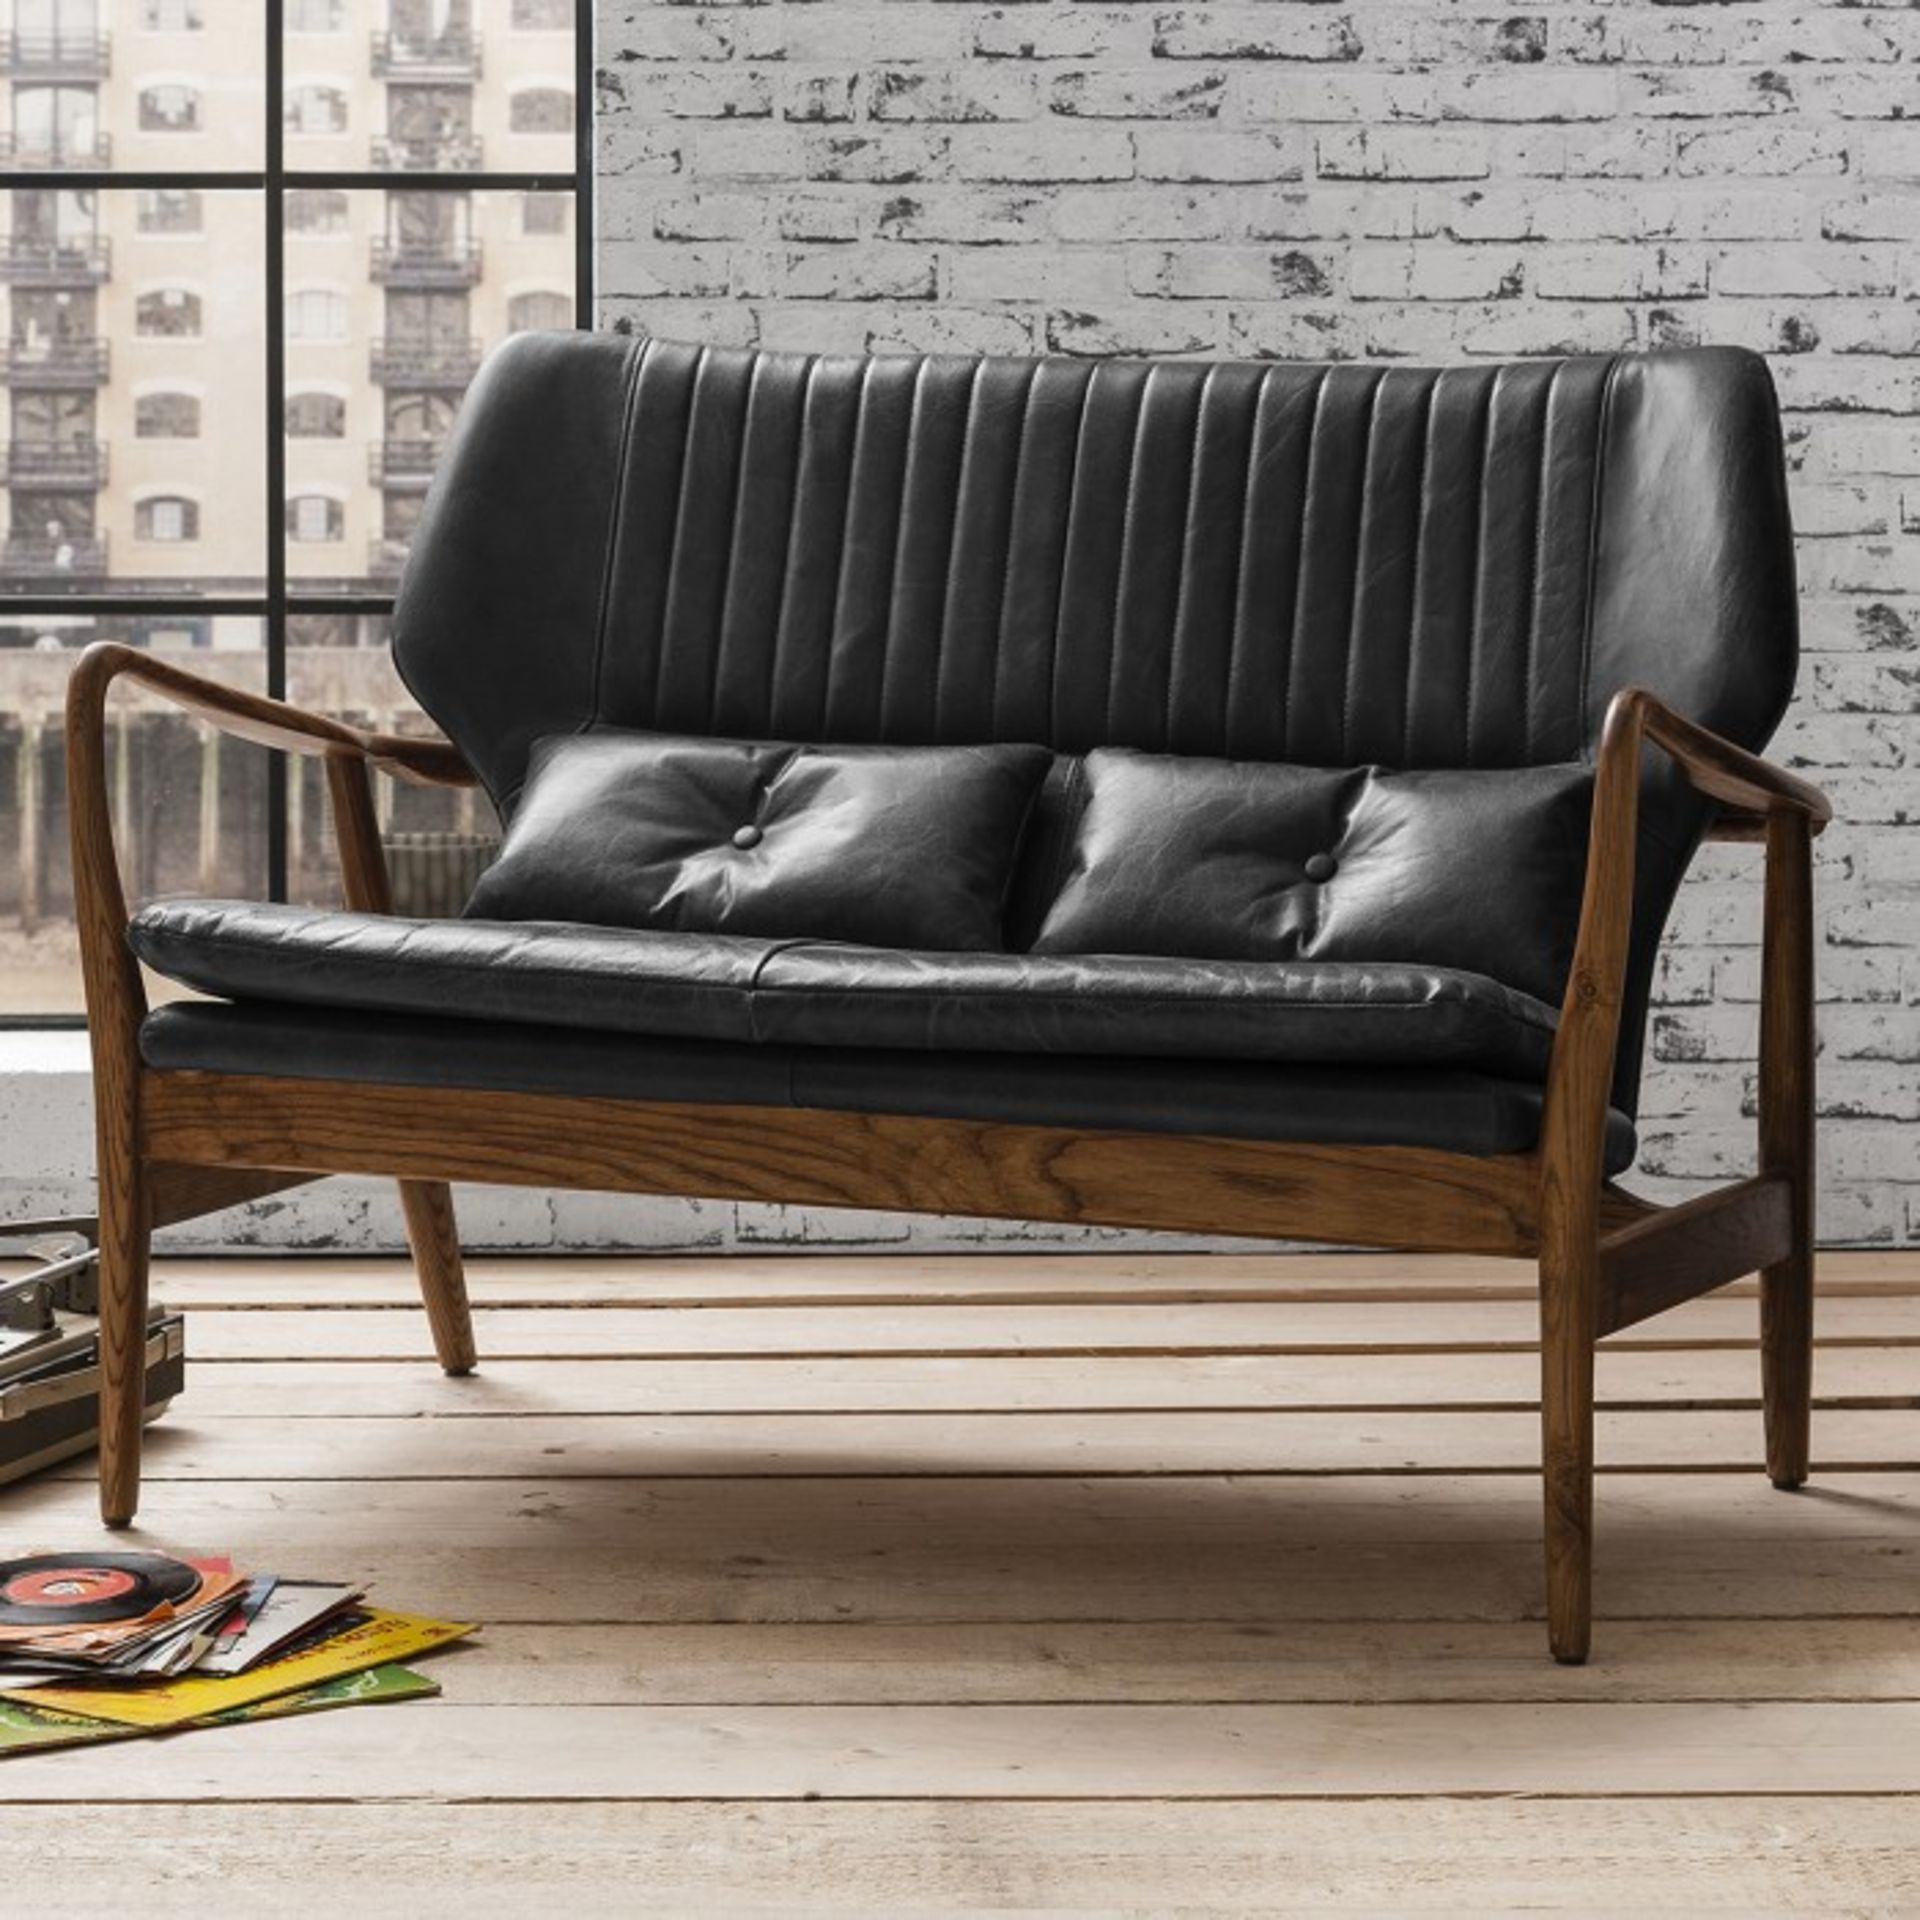 Whitworth Sofa Charcoal vintage leather The beautiful curves and vintage-inspired design of the